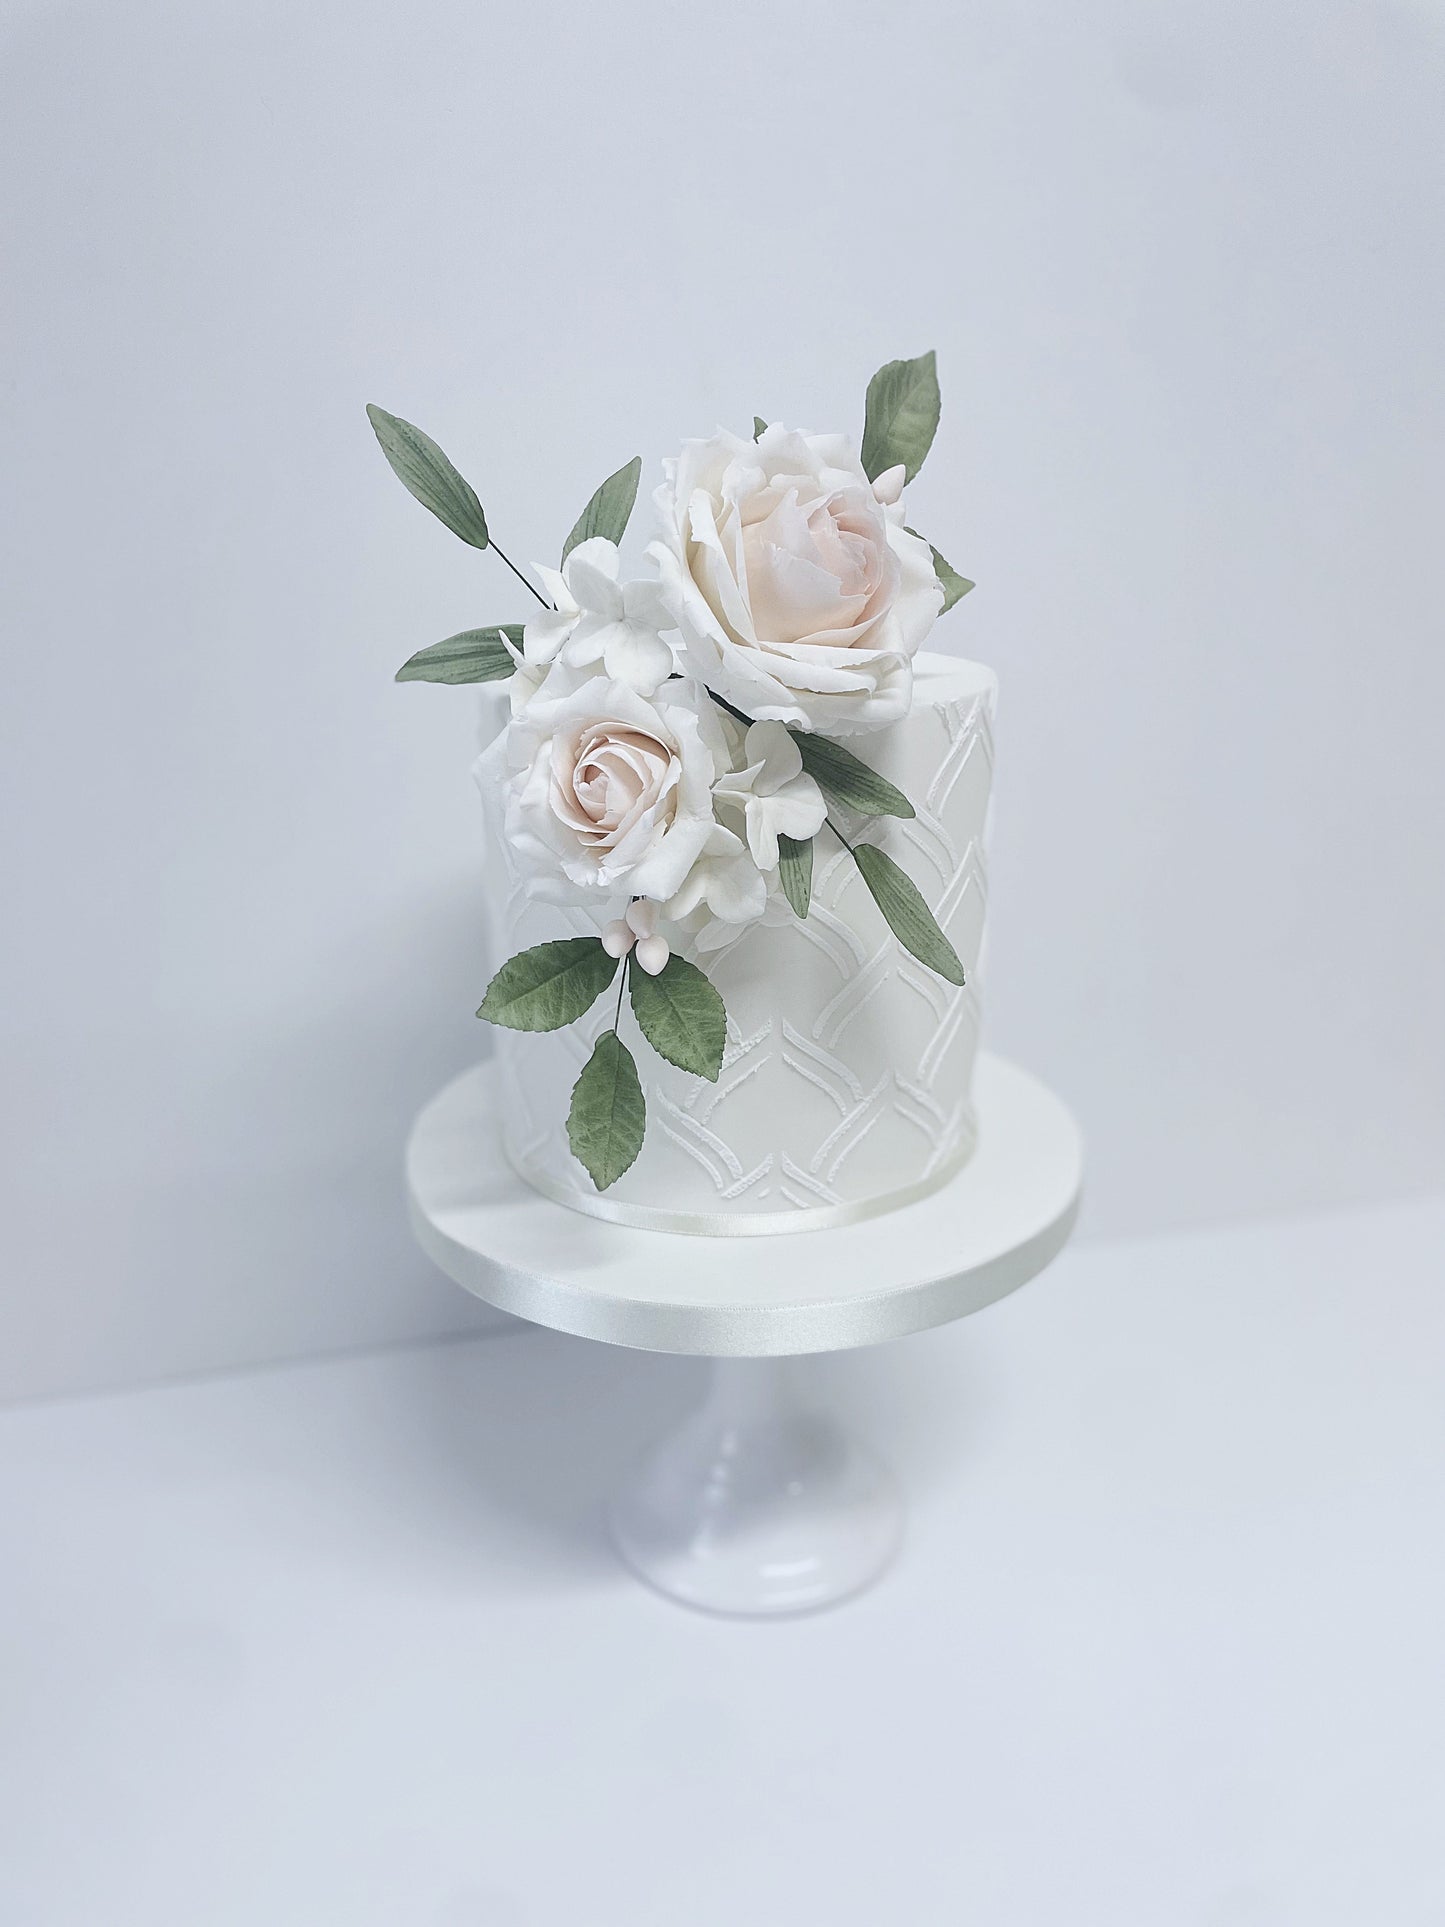 SIGNATURE SUGAR FLOWER ROSE, FILLER, FOLIAGE & STENCILLING CAKE DECORATING CLASS SCOTLAND IN PERSON  - SUNDAY 17TH SEPTEMBER